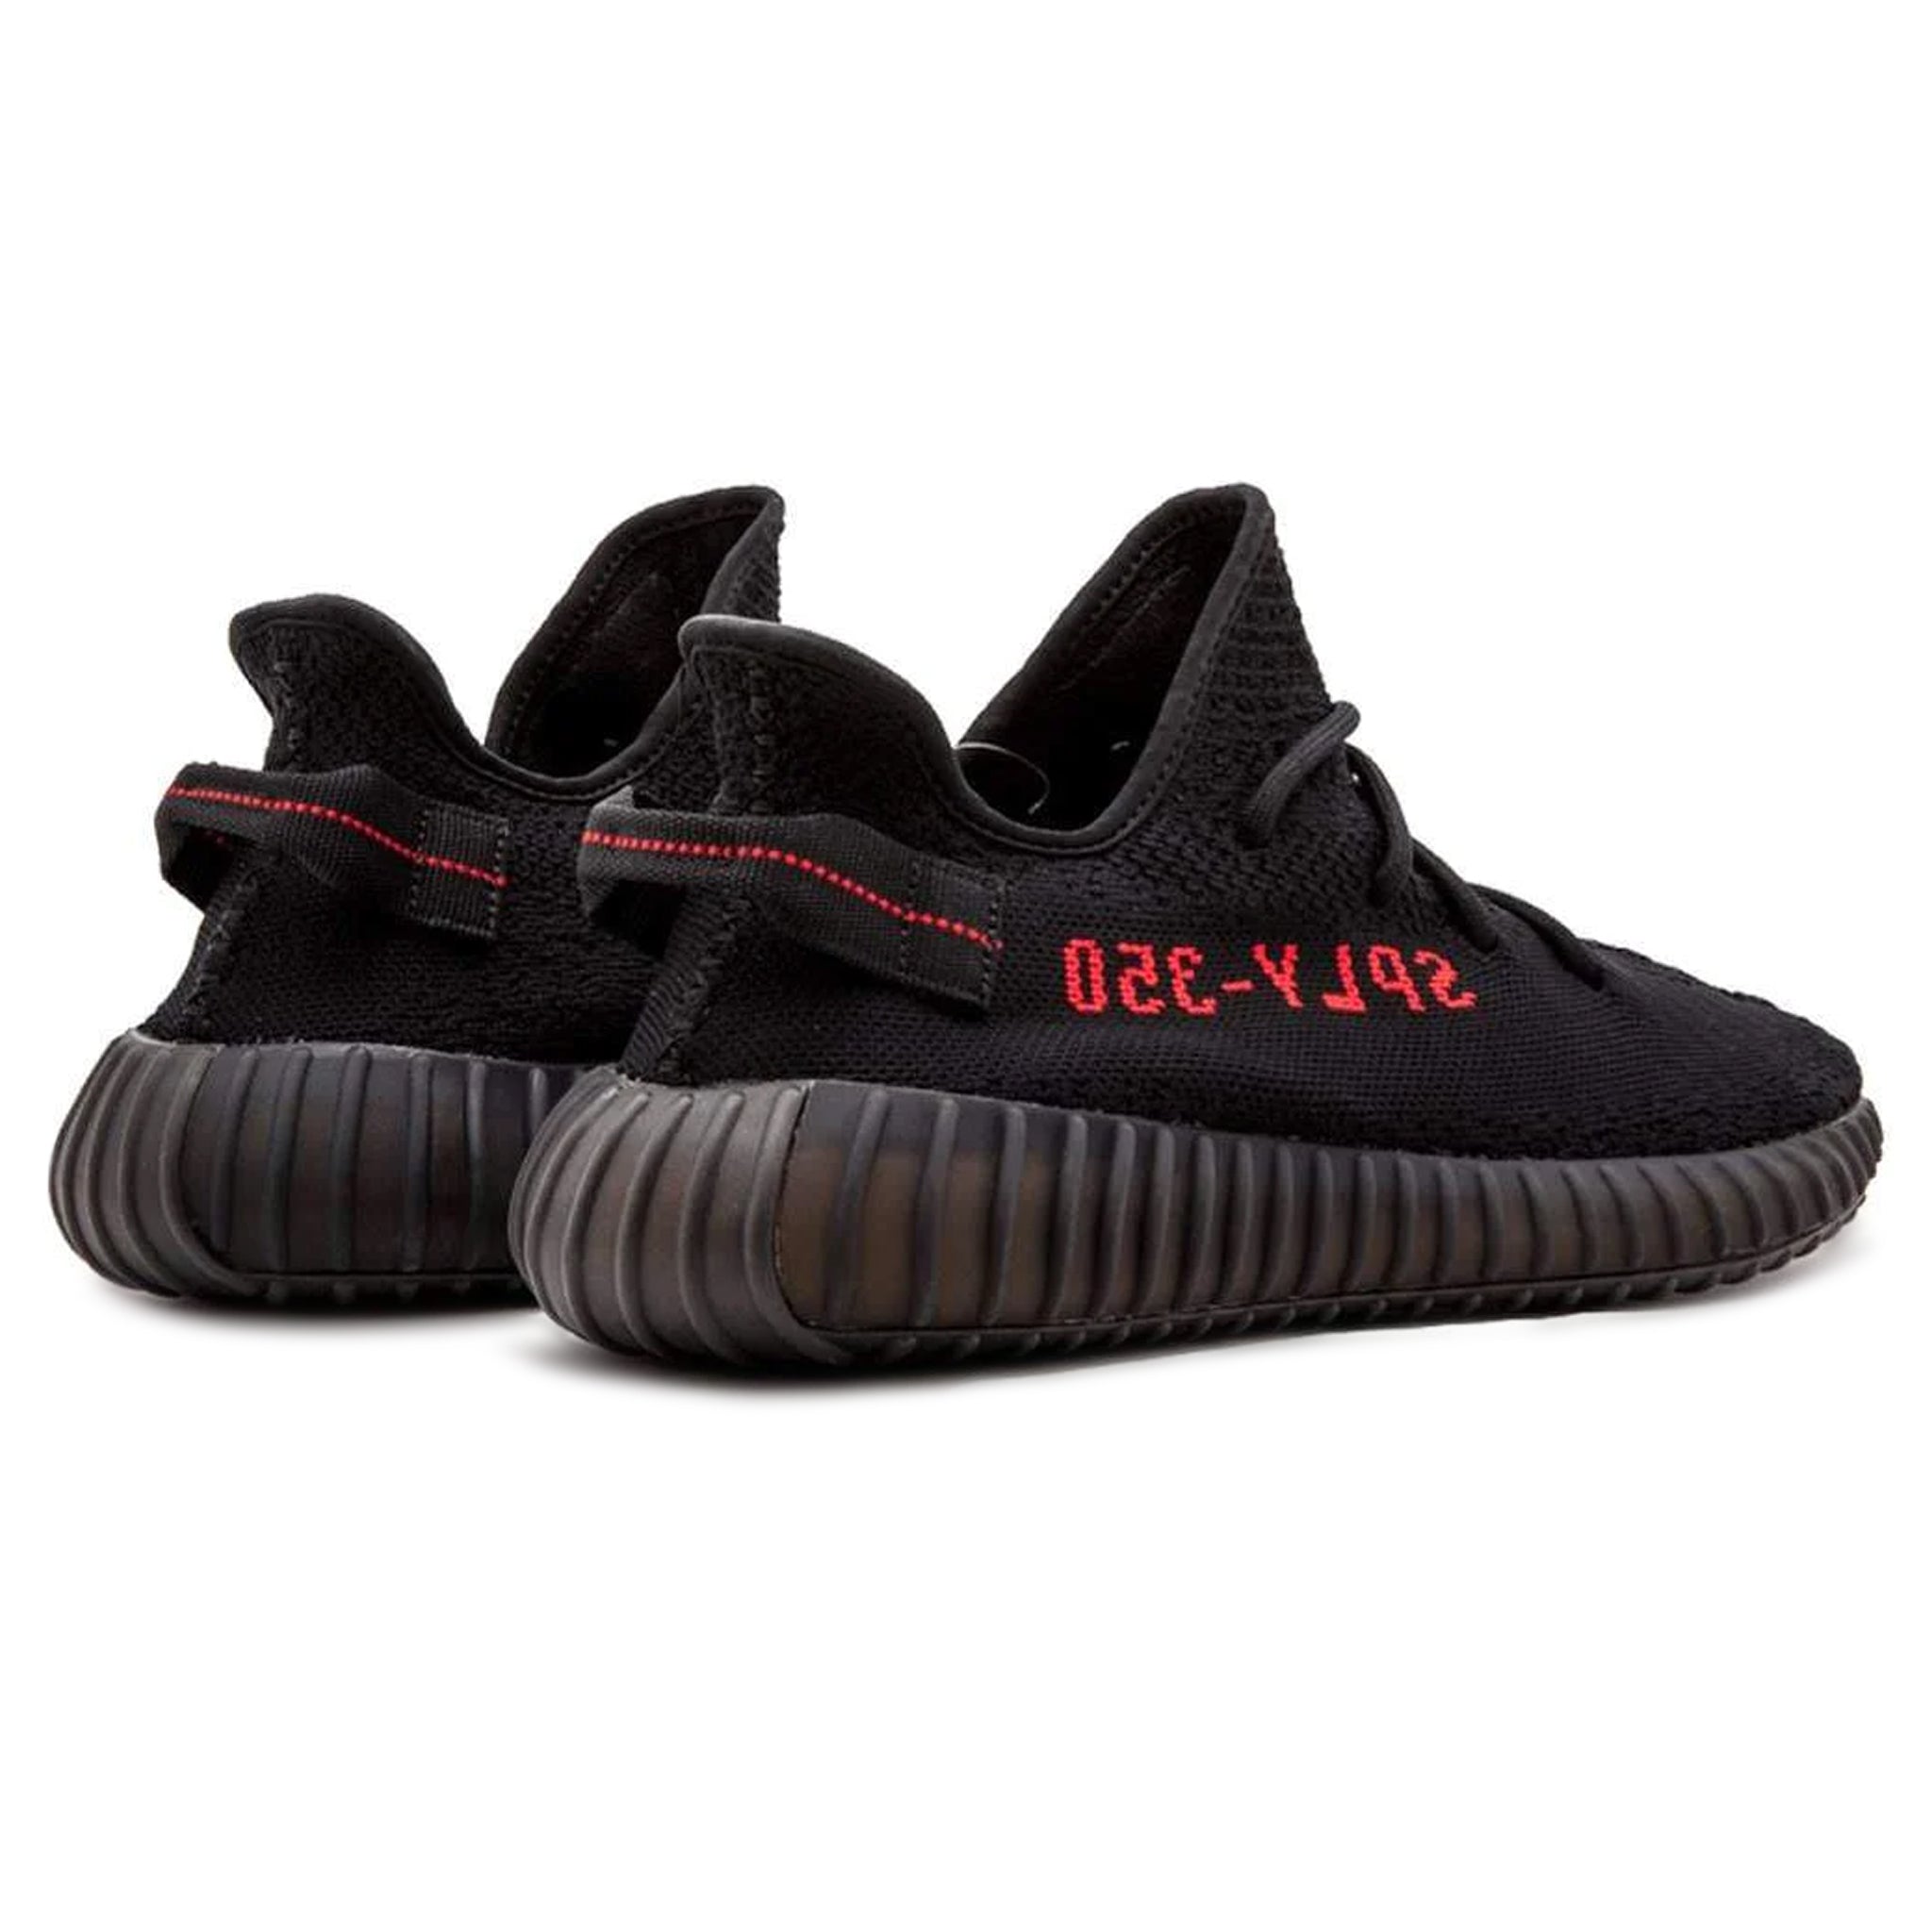 Heel view of Adidas Yeezy Boost 350 V2 Bred Core Black Red CP9652